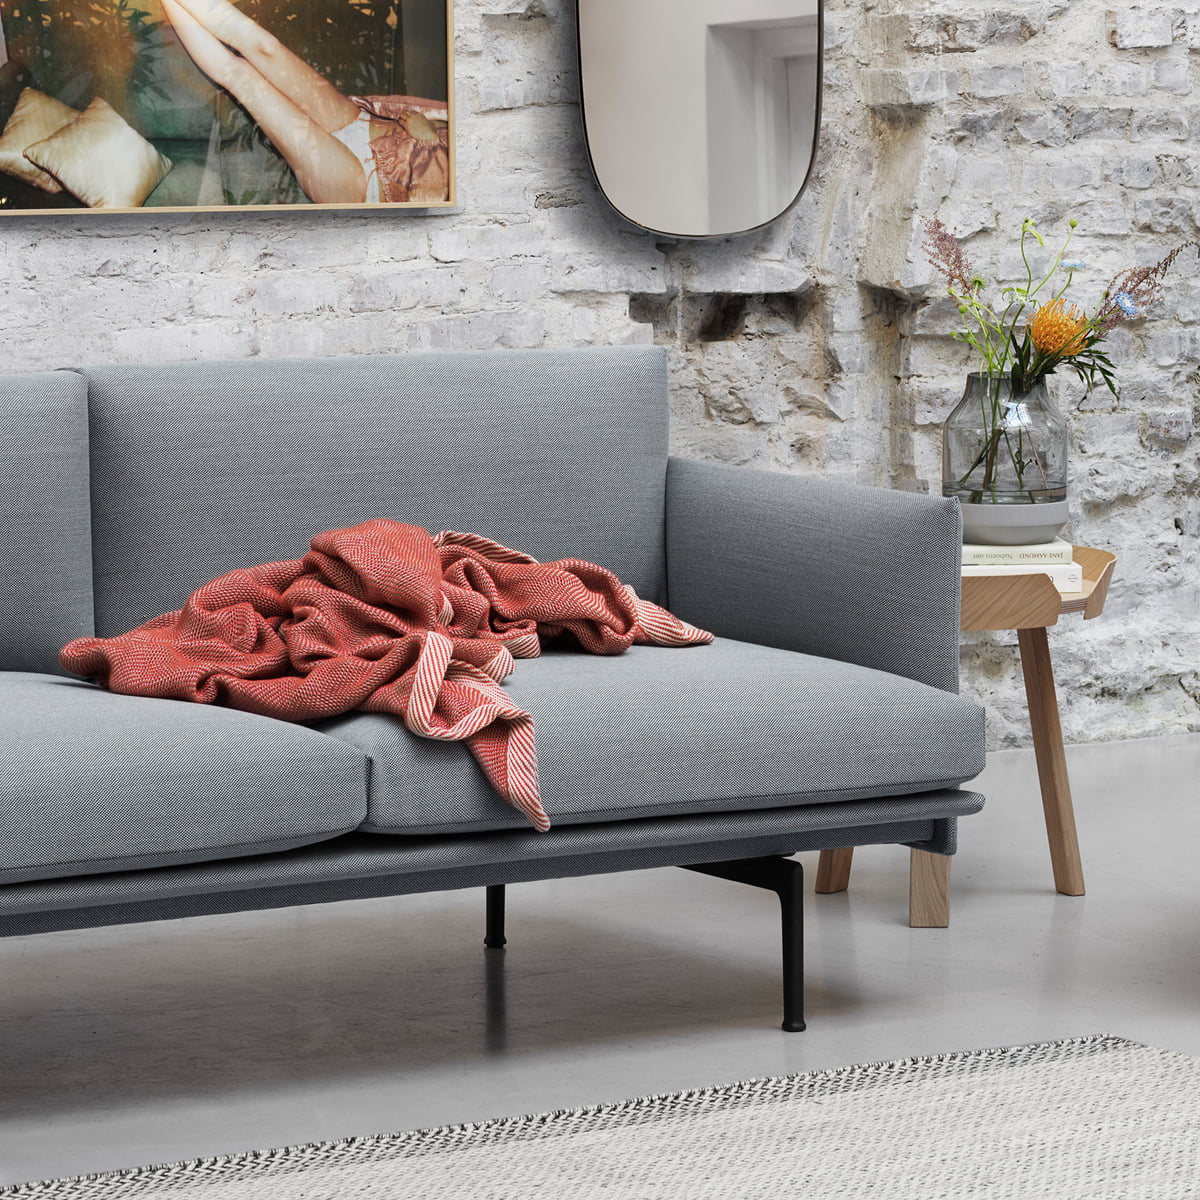 Details about   Authentic Muuto Outline Two-Seater SofaDesign Within Reach 